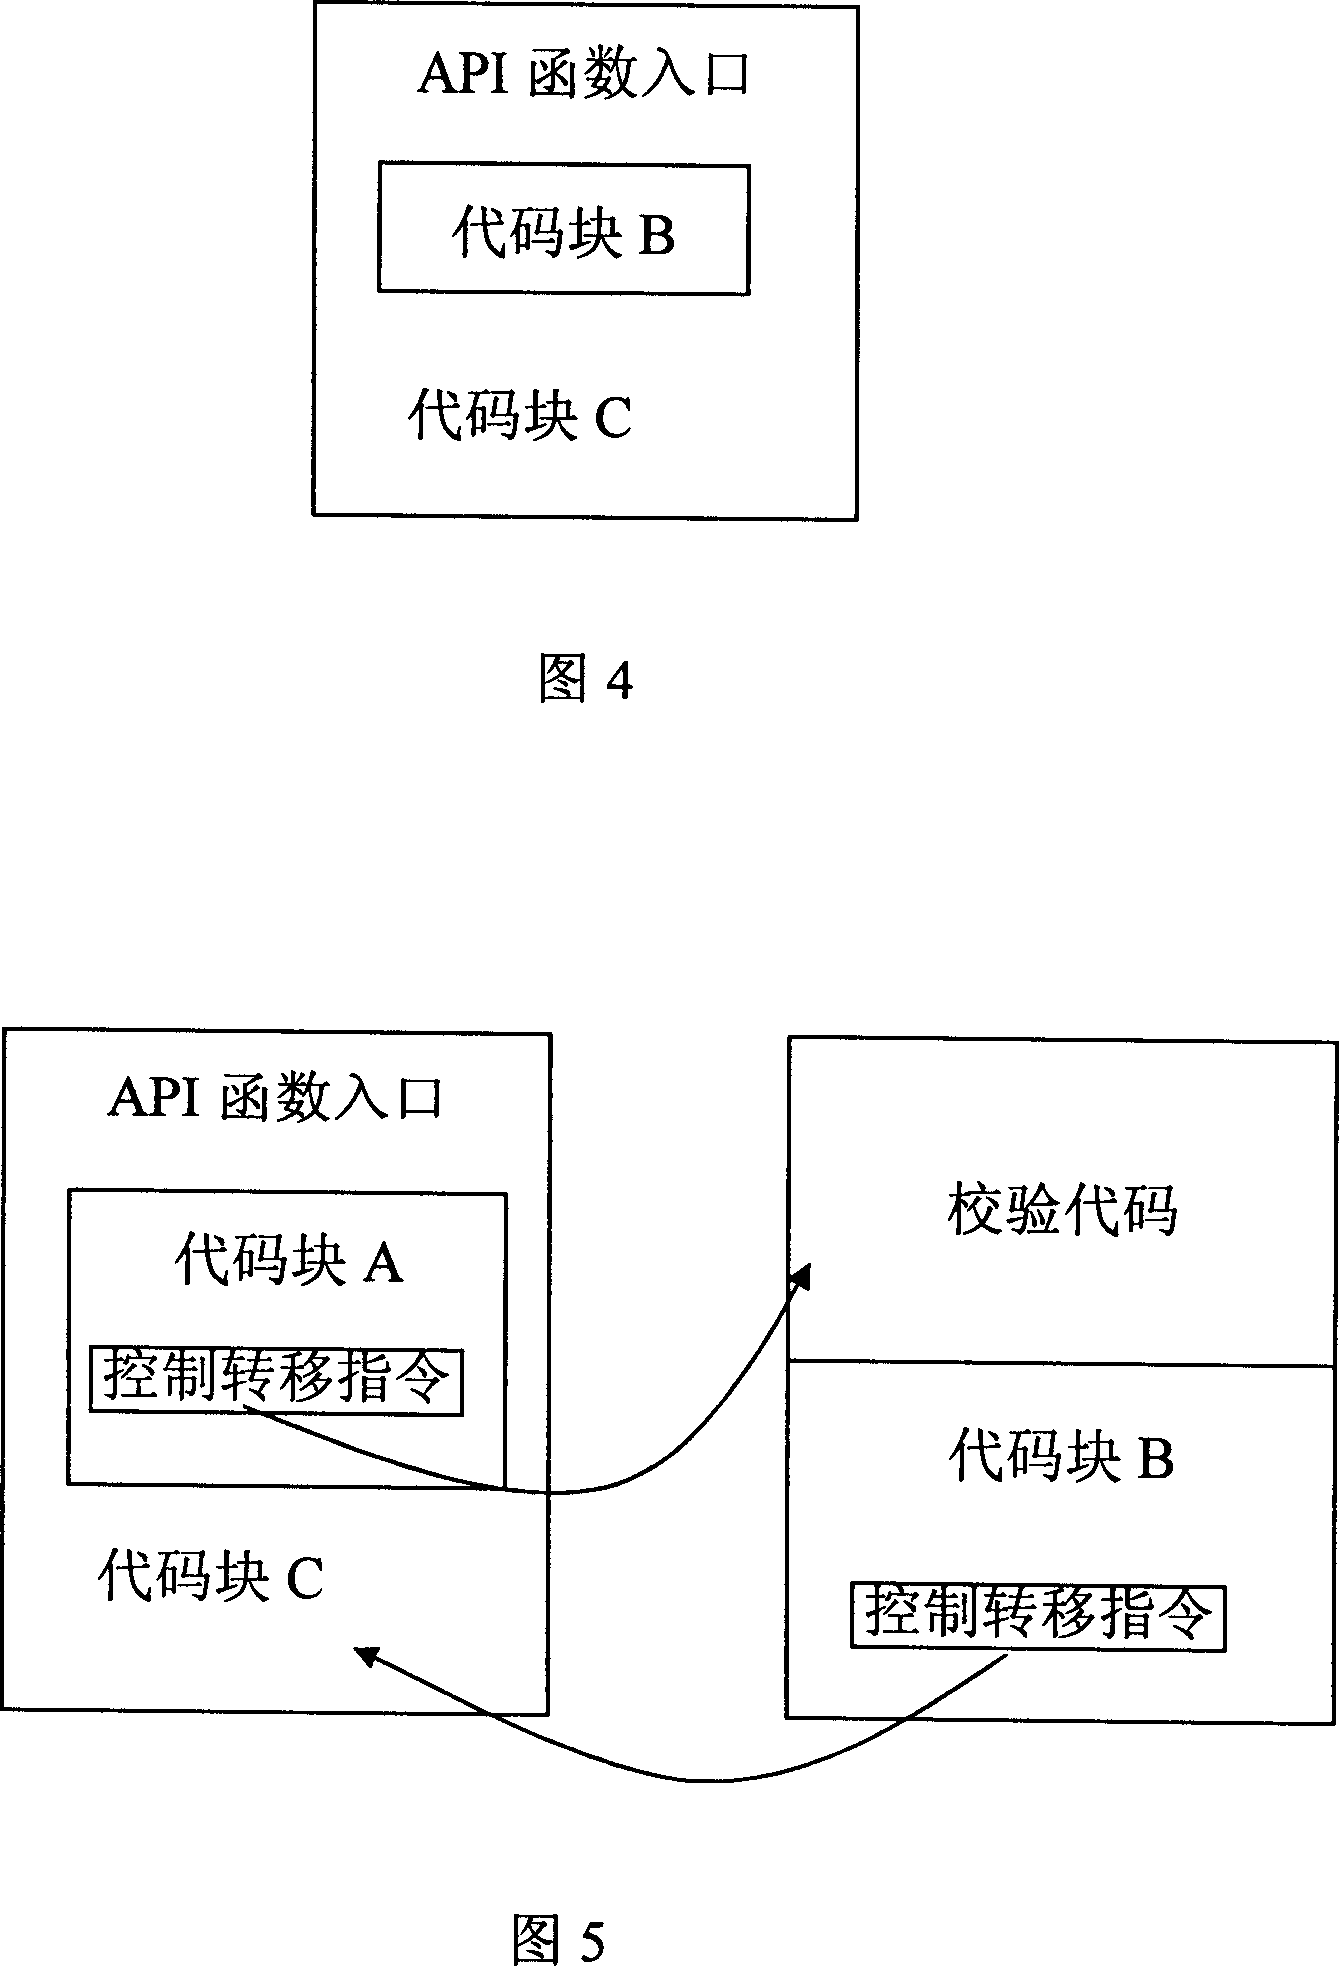 System and method for preventing vicious code attach